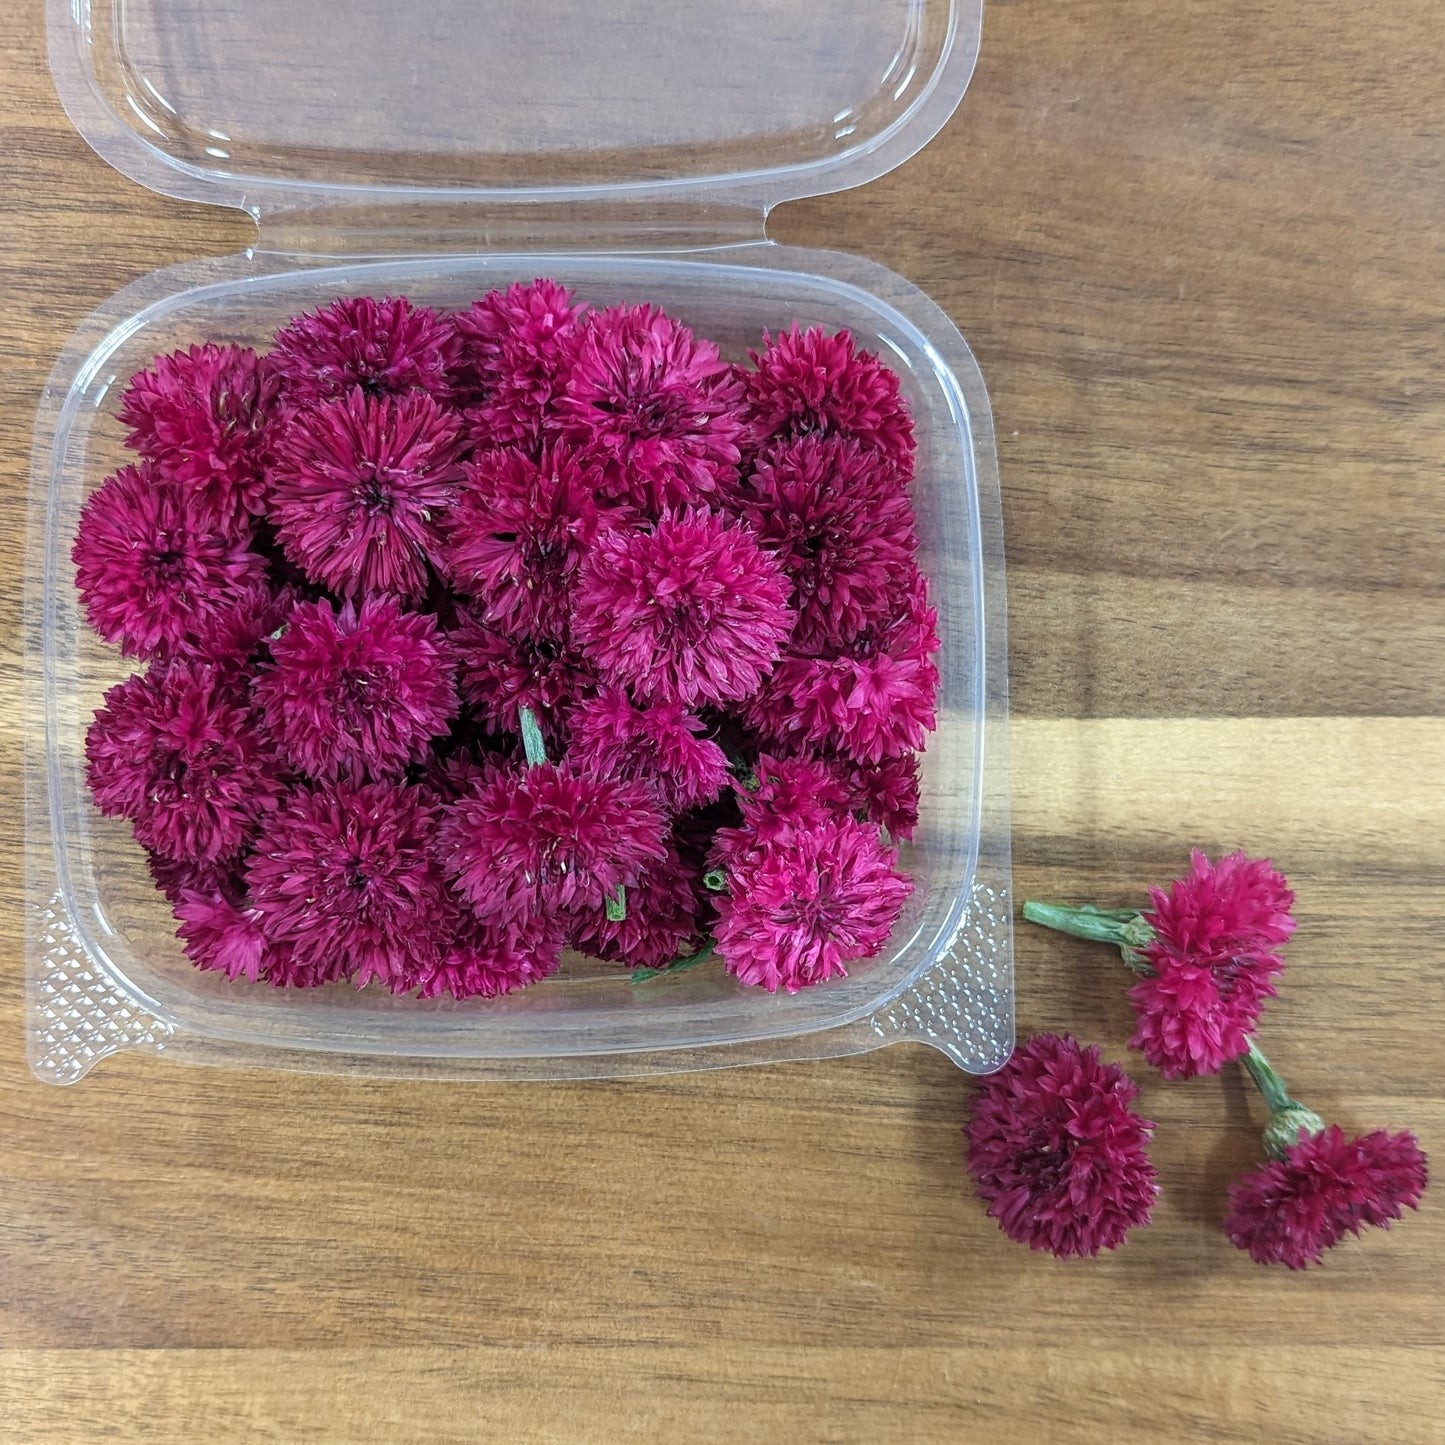 Fresh Edible Flowers - Bachelor Buttons, Red Boy